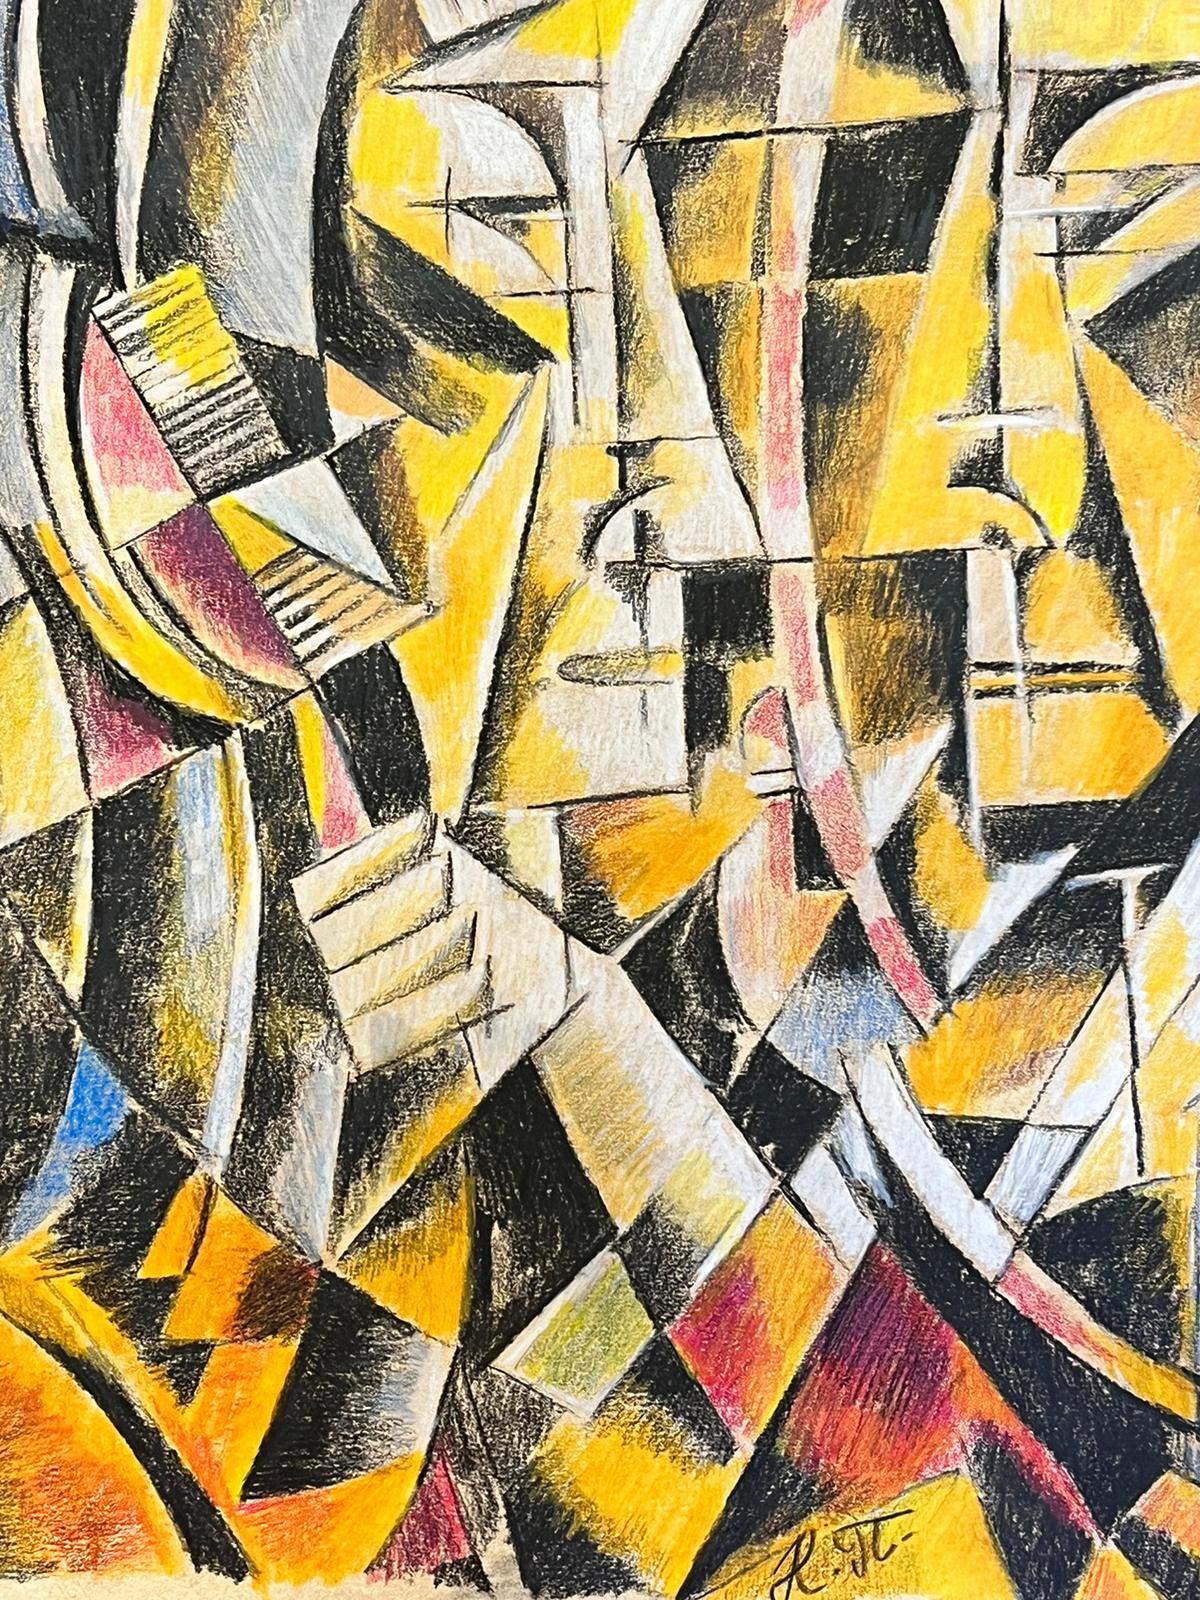 Continental School Abstract Painting - Cubist Portrait Figures Yellow Abstract Original painting 